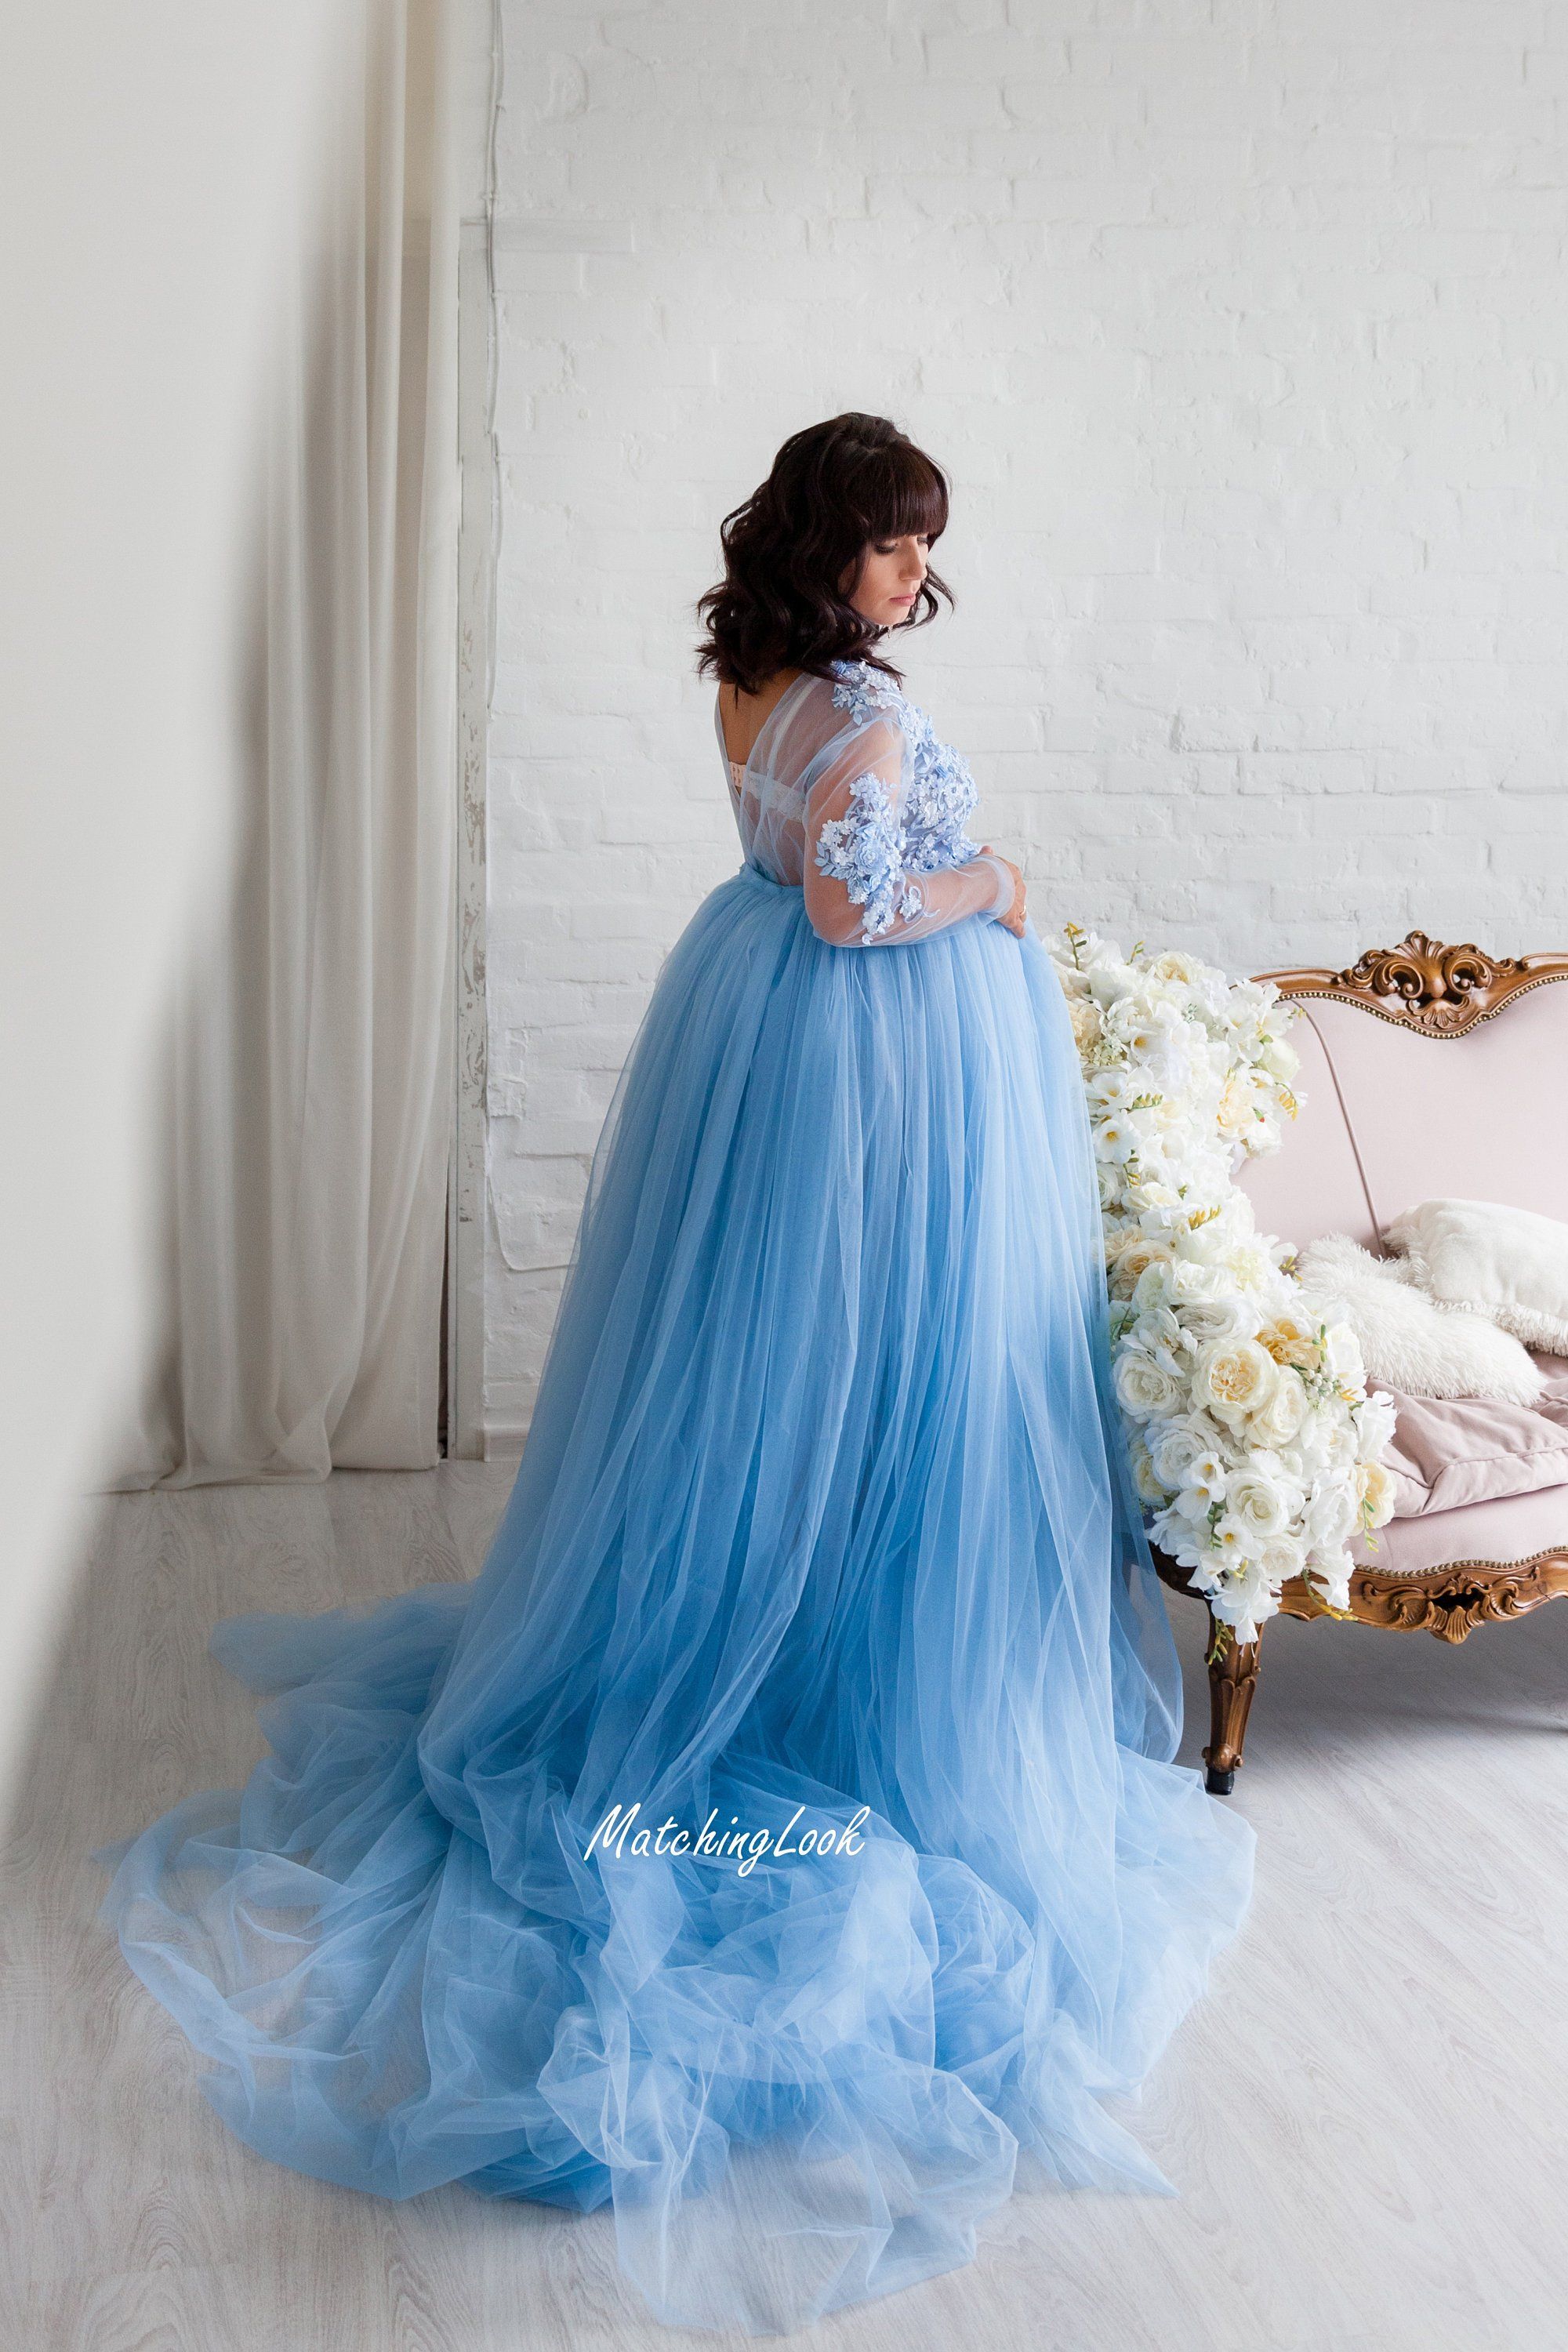 Baby Blue Maternity Lace Blue Dress for photoshoot